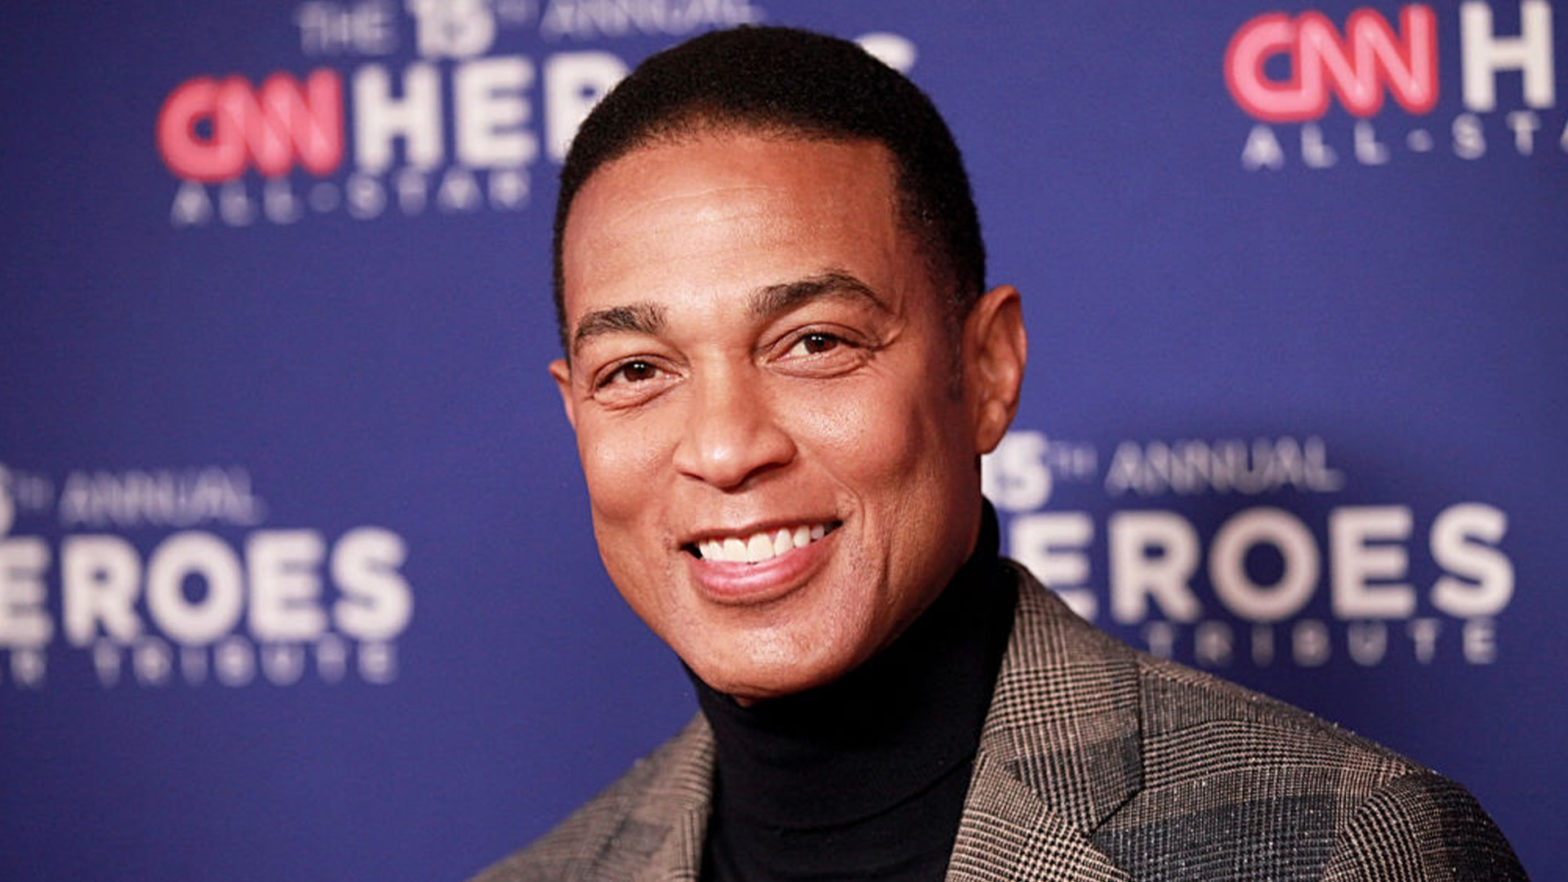 Don Lemon On U.S. Men's Soccer Team: 'If They Make More Money, Then They Should Get More Money'